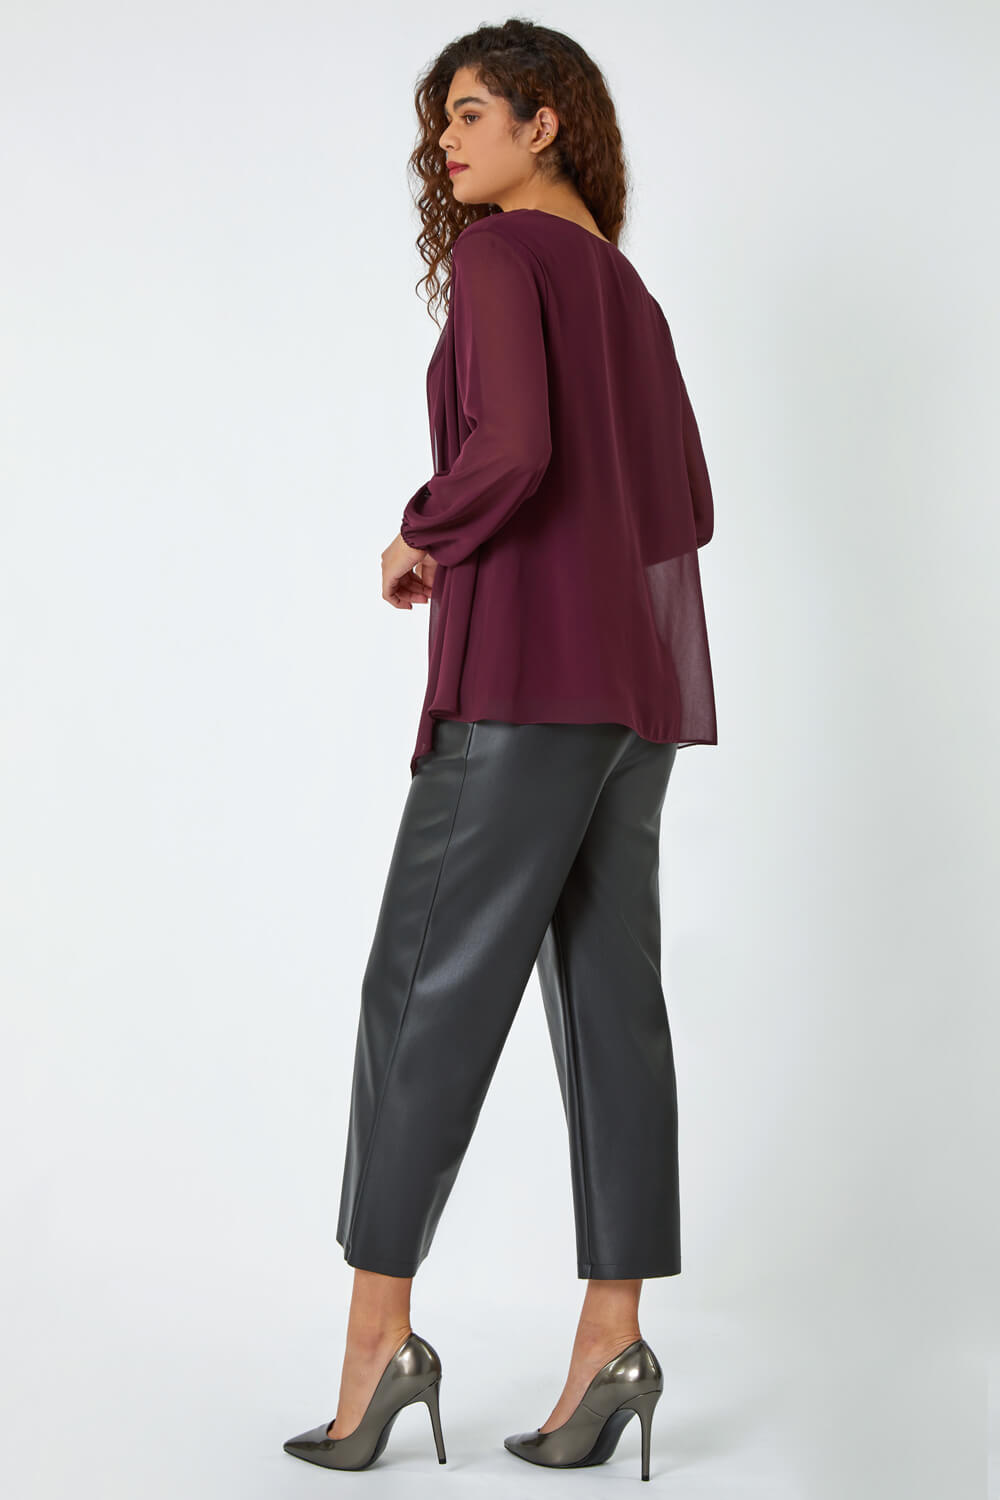 Wine Contrast Chiffon Overlay Stretch Top, Image 3 of 5